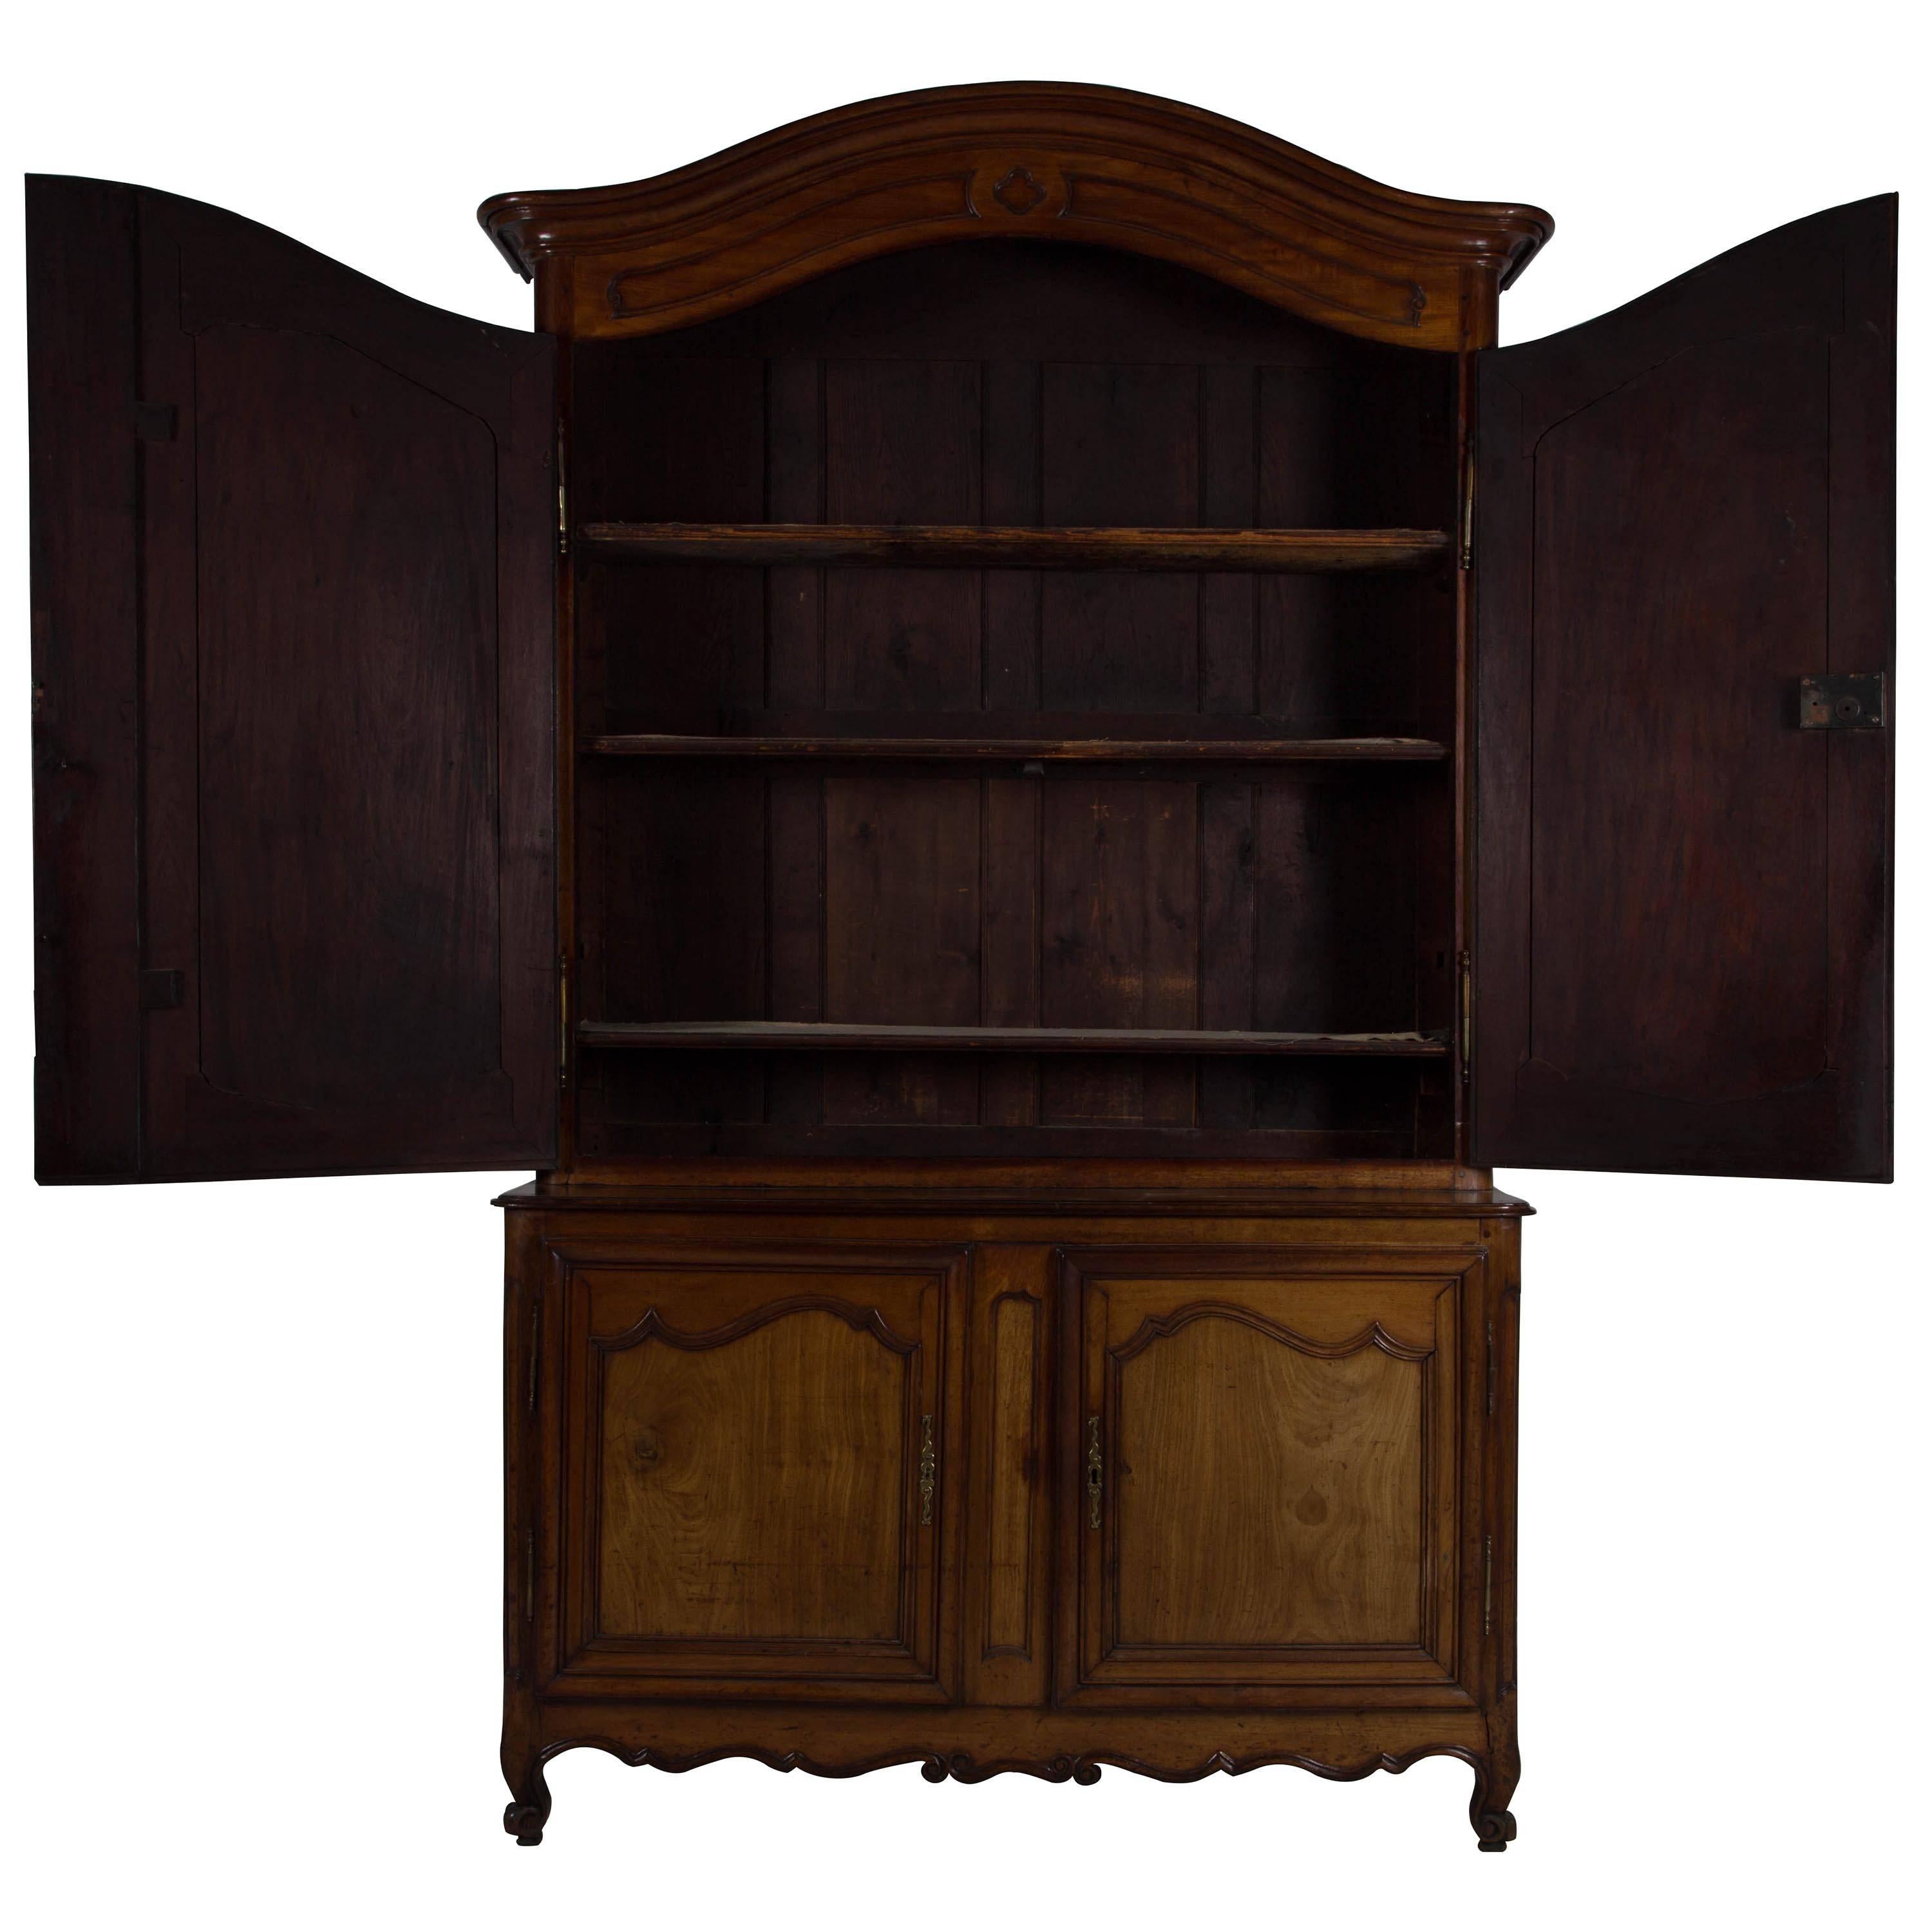 A fine buffet deux corps in solid mahogany, of a lovely golden colour, Louis XV period, Bordeaux region. French c.1750.